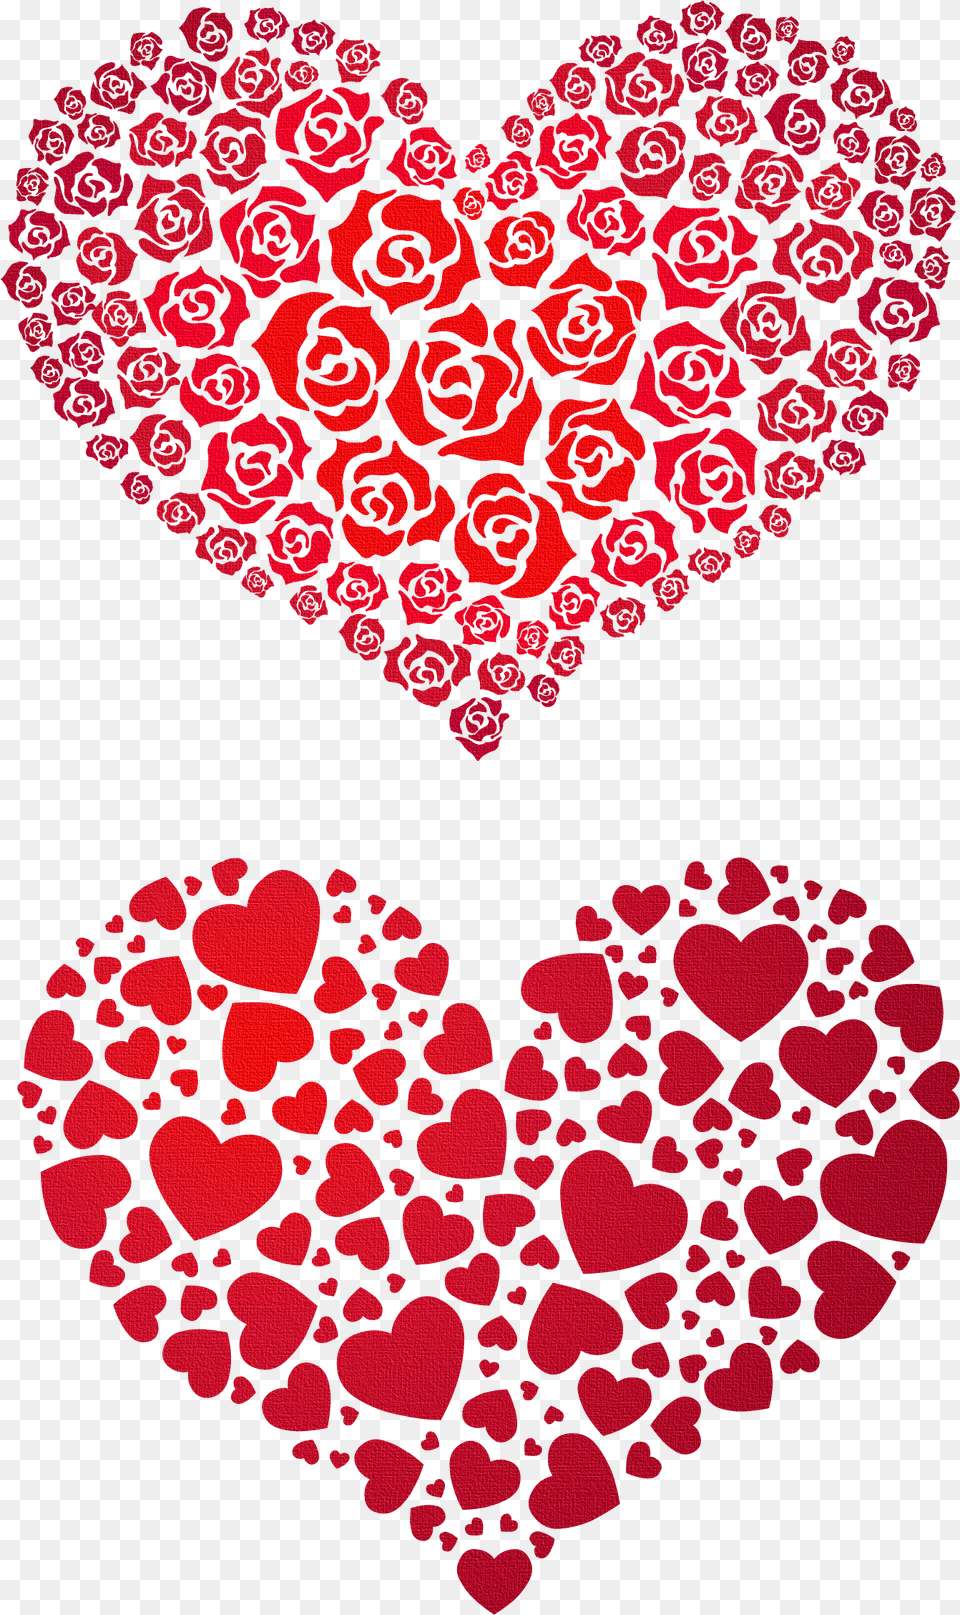 Valentine Hd Transparent Valentine Hd Heart Of Hearts Png